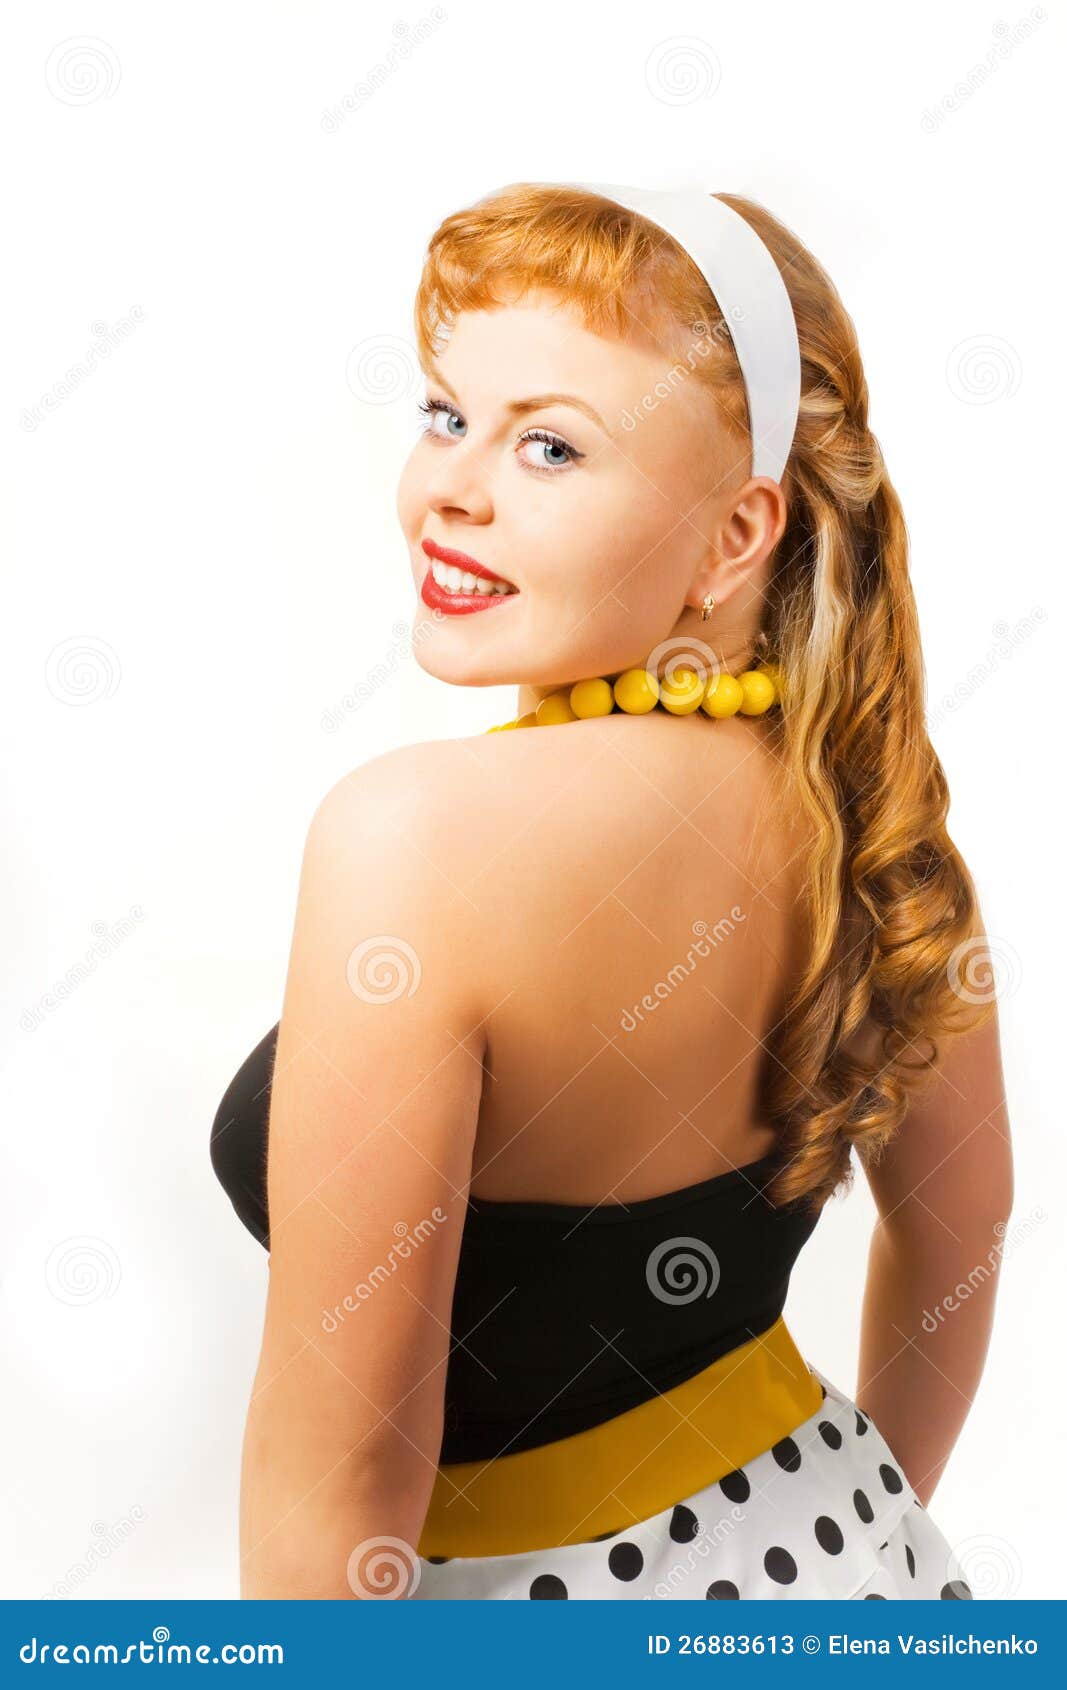 Pin Up Girl Posing Over White Background Stock Image - Image of lady ...